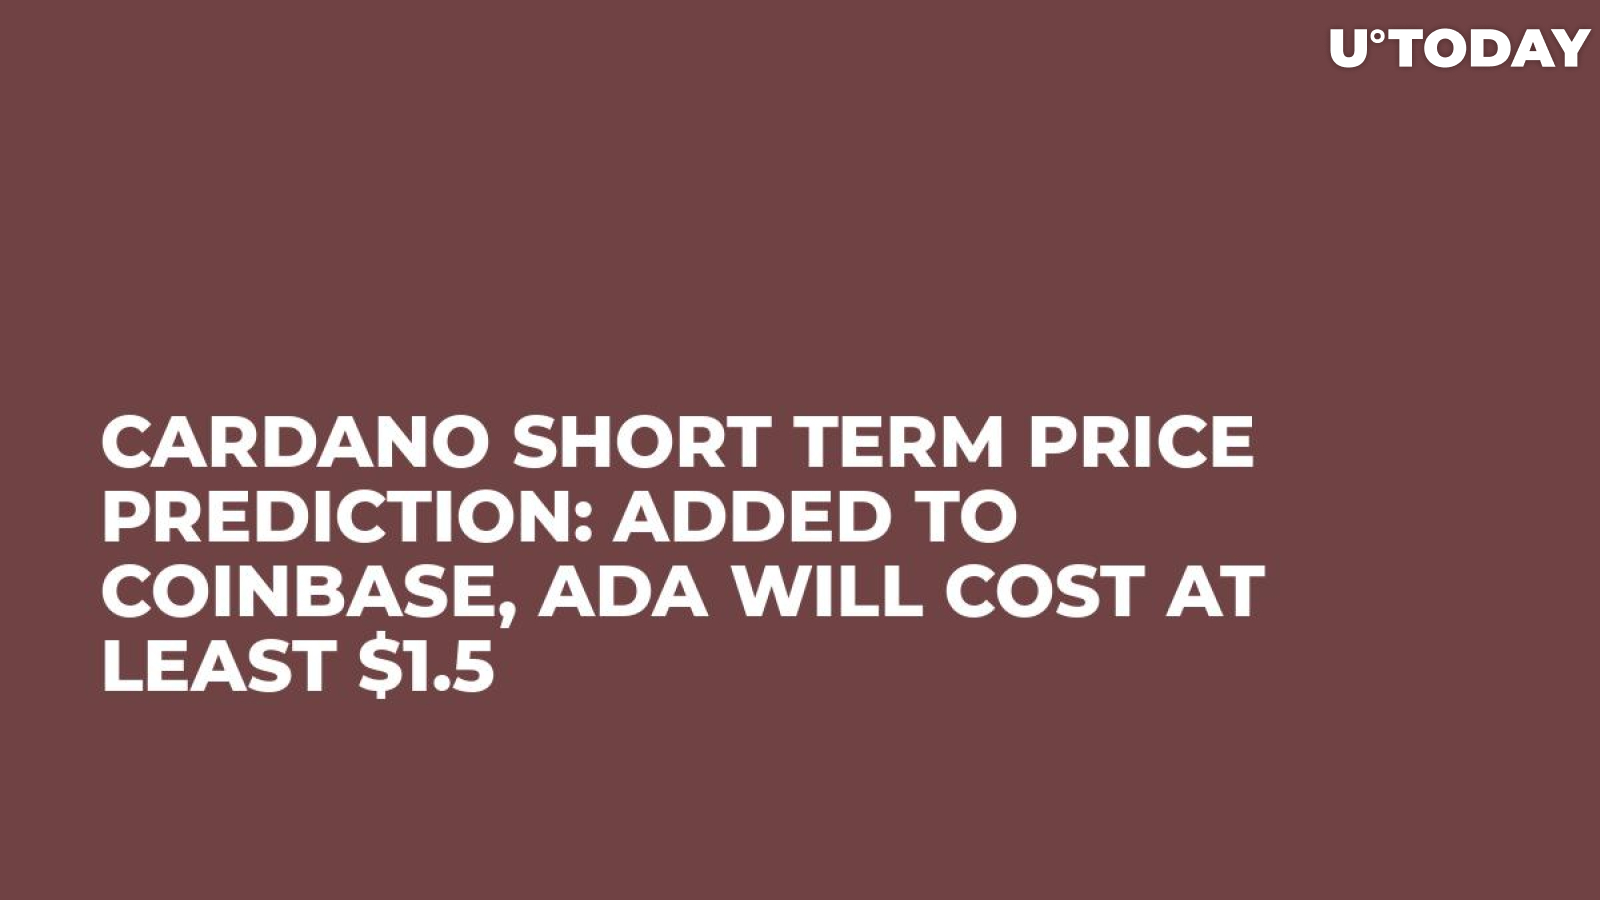 Cardano Short Term Price Prediction: Added to Coinbase, ADA Will Cost At Least $1.5